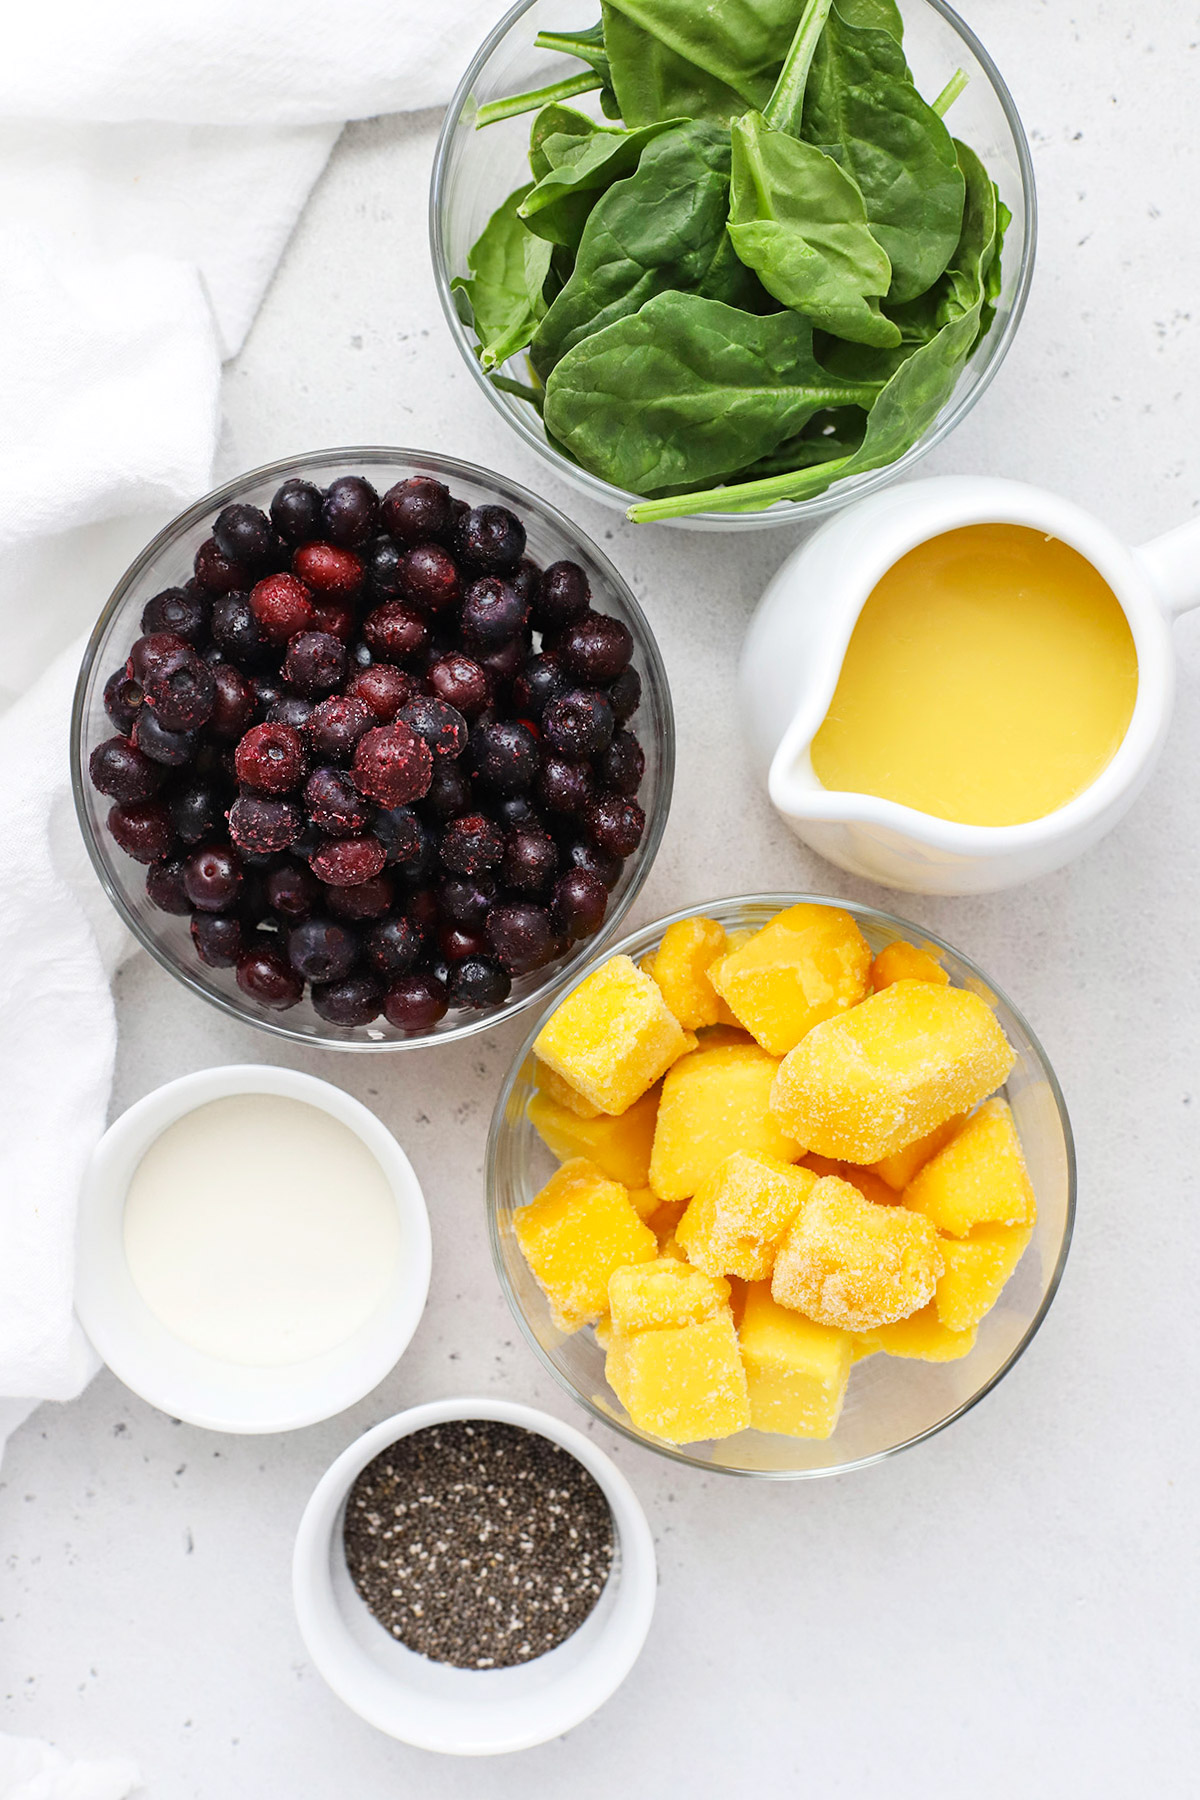 Overhead view of ingredients for blueberry mango smoothies